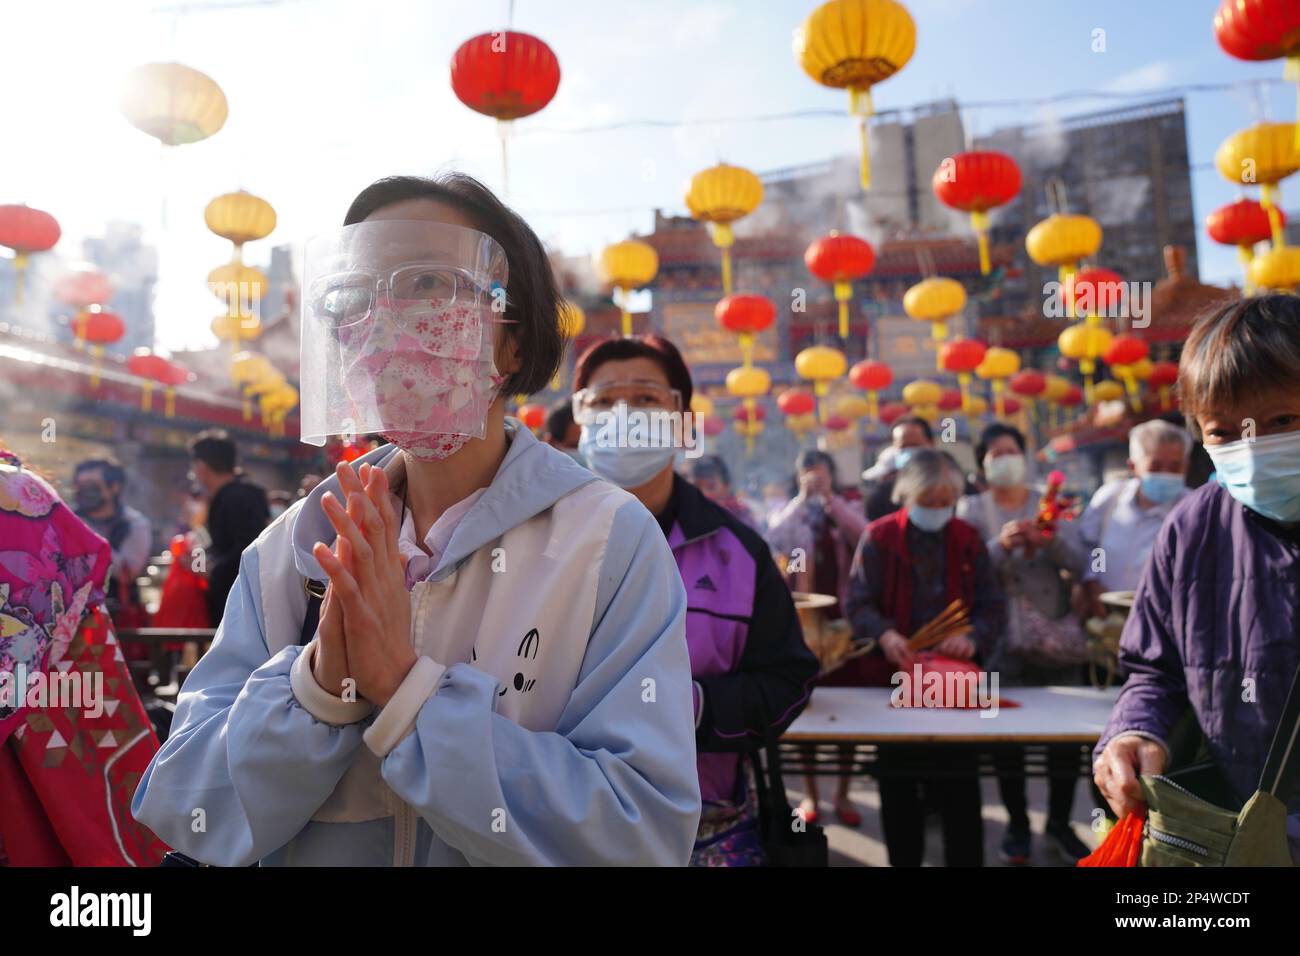 Worshippers make offering on the first day of the Chinese Lunar New Year at the Wong Tai Sin Temple, amid the Covid-19 crowd-control measures.  12FEB21   SCMP / Sam Tsang Stock Photo